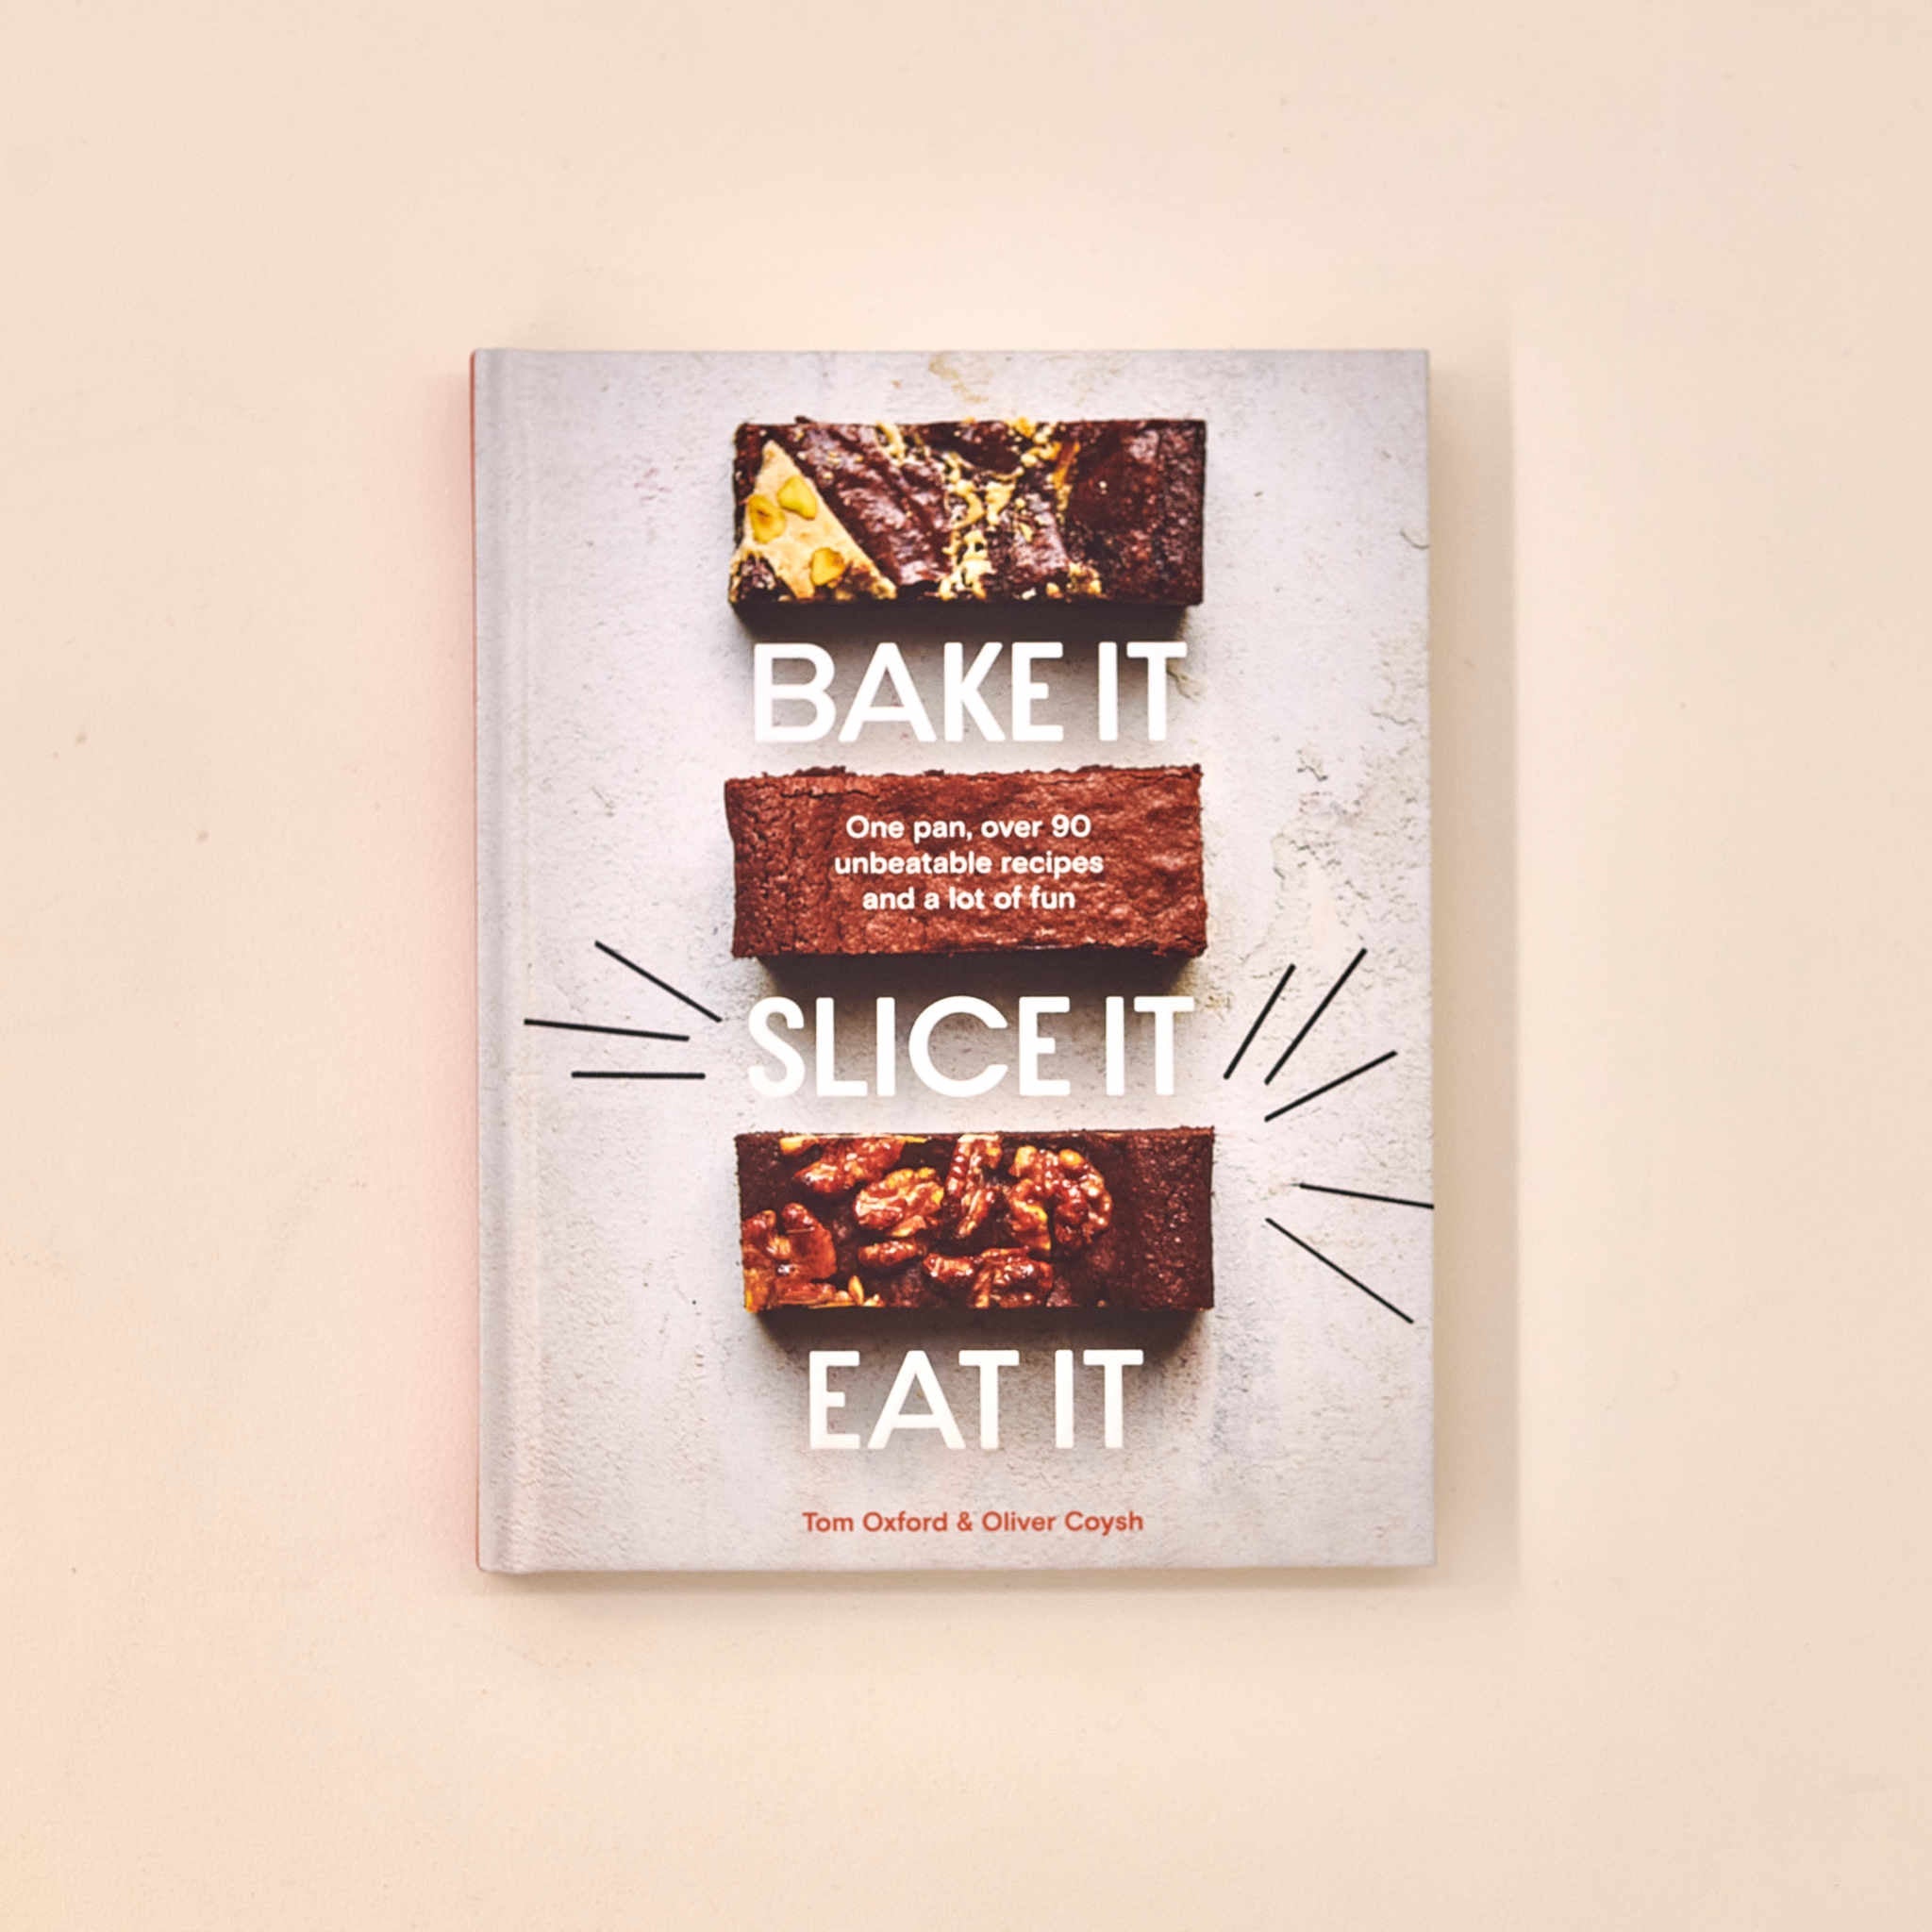 X-rated Signed Edition - Bake it. Slice it. Eat it. Cookbook